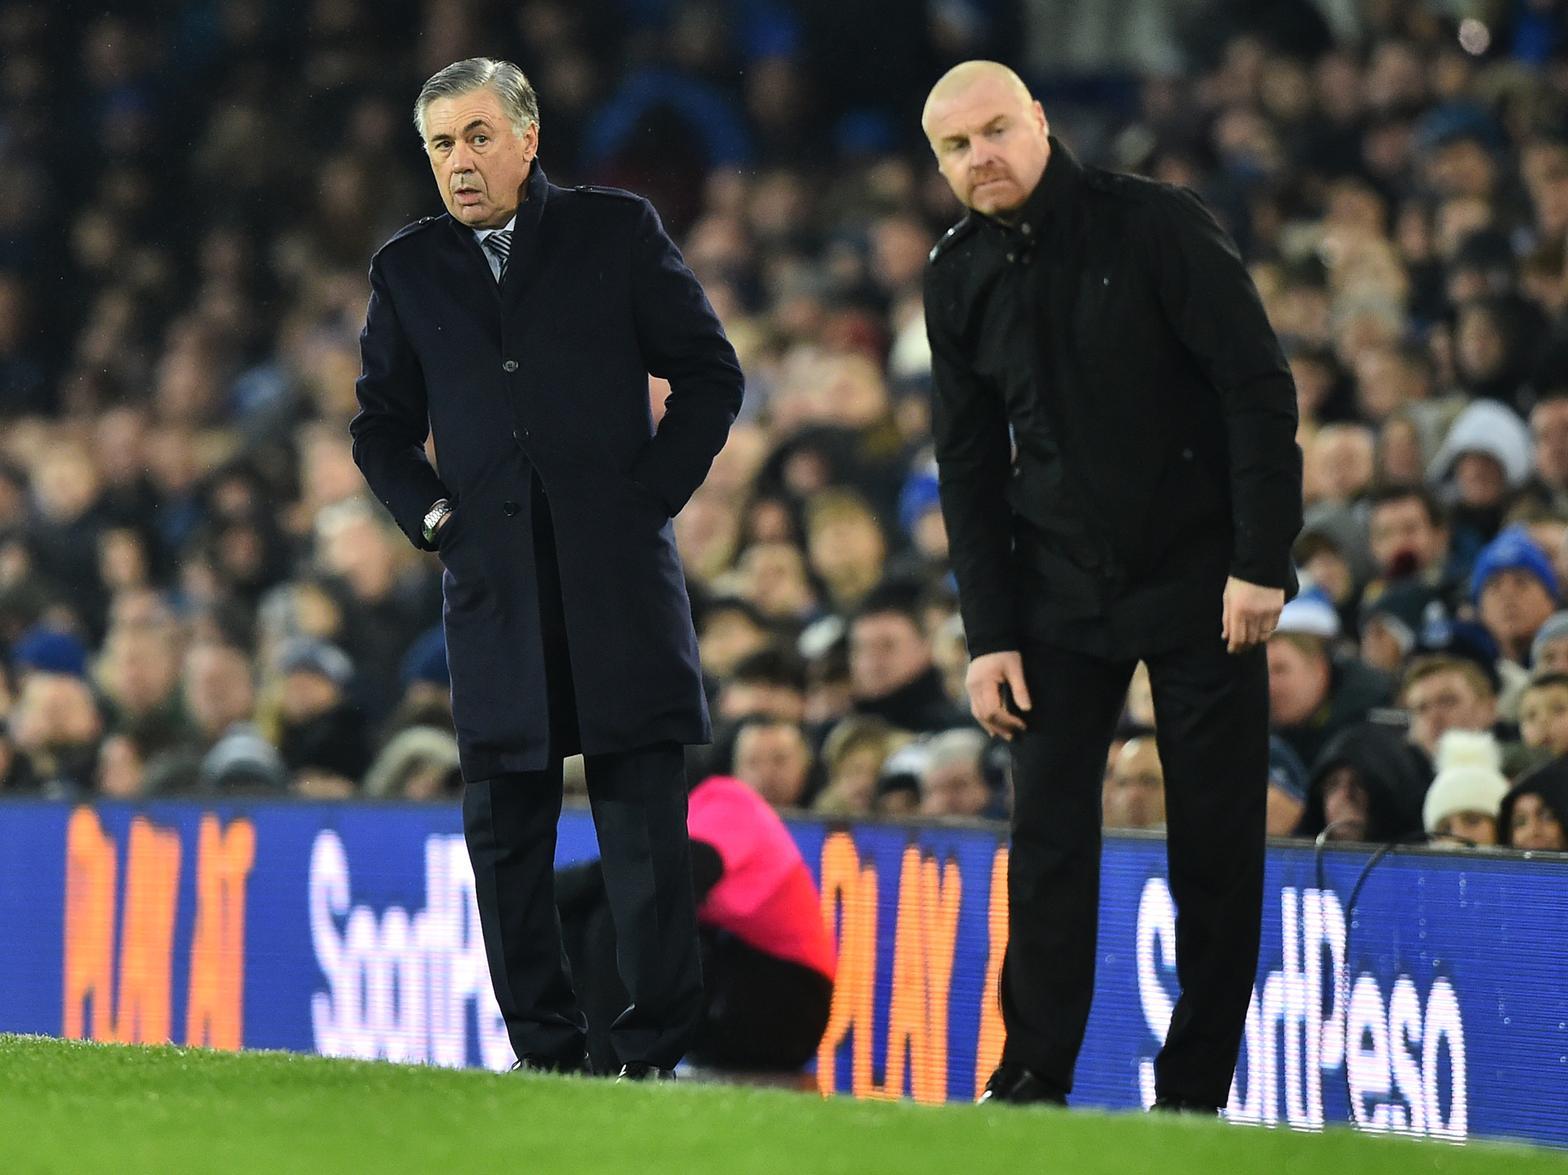 New Everton boss Carlo Ancelotti and Burnley manager Sean Dyche at Goodison Park on Boxing Day.